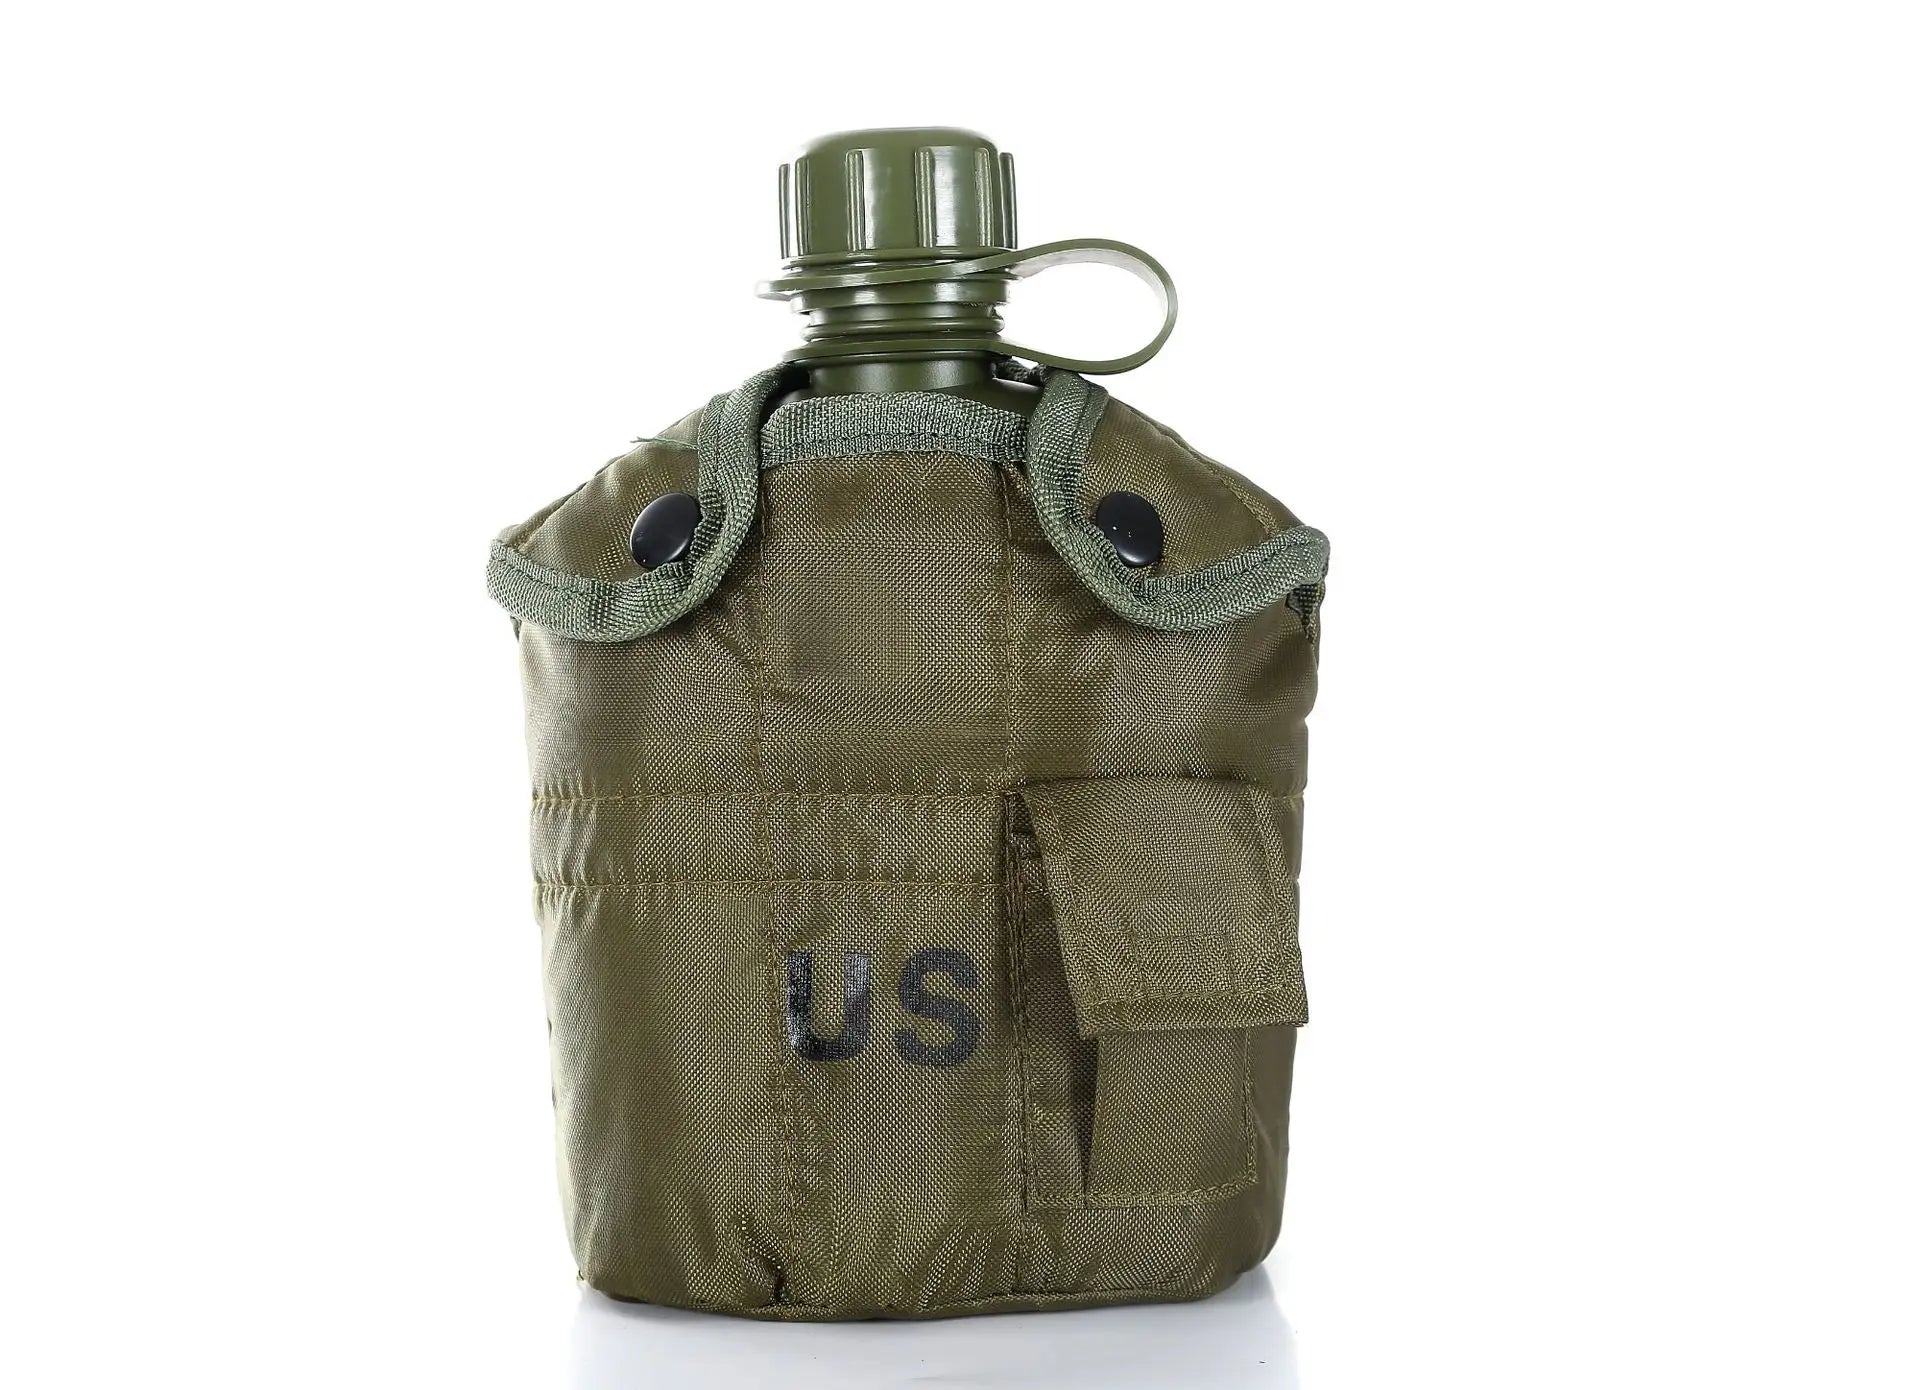  Outdoor 1L Water Bottle Alloy Lunch Box Camping Survival Kettle Outdoor Tableware Bag #